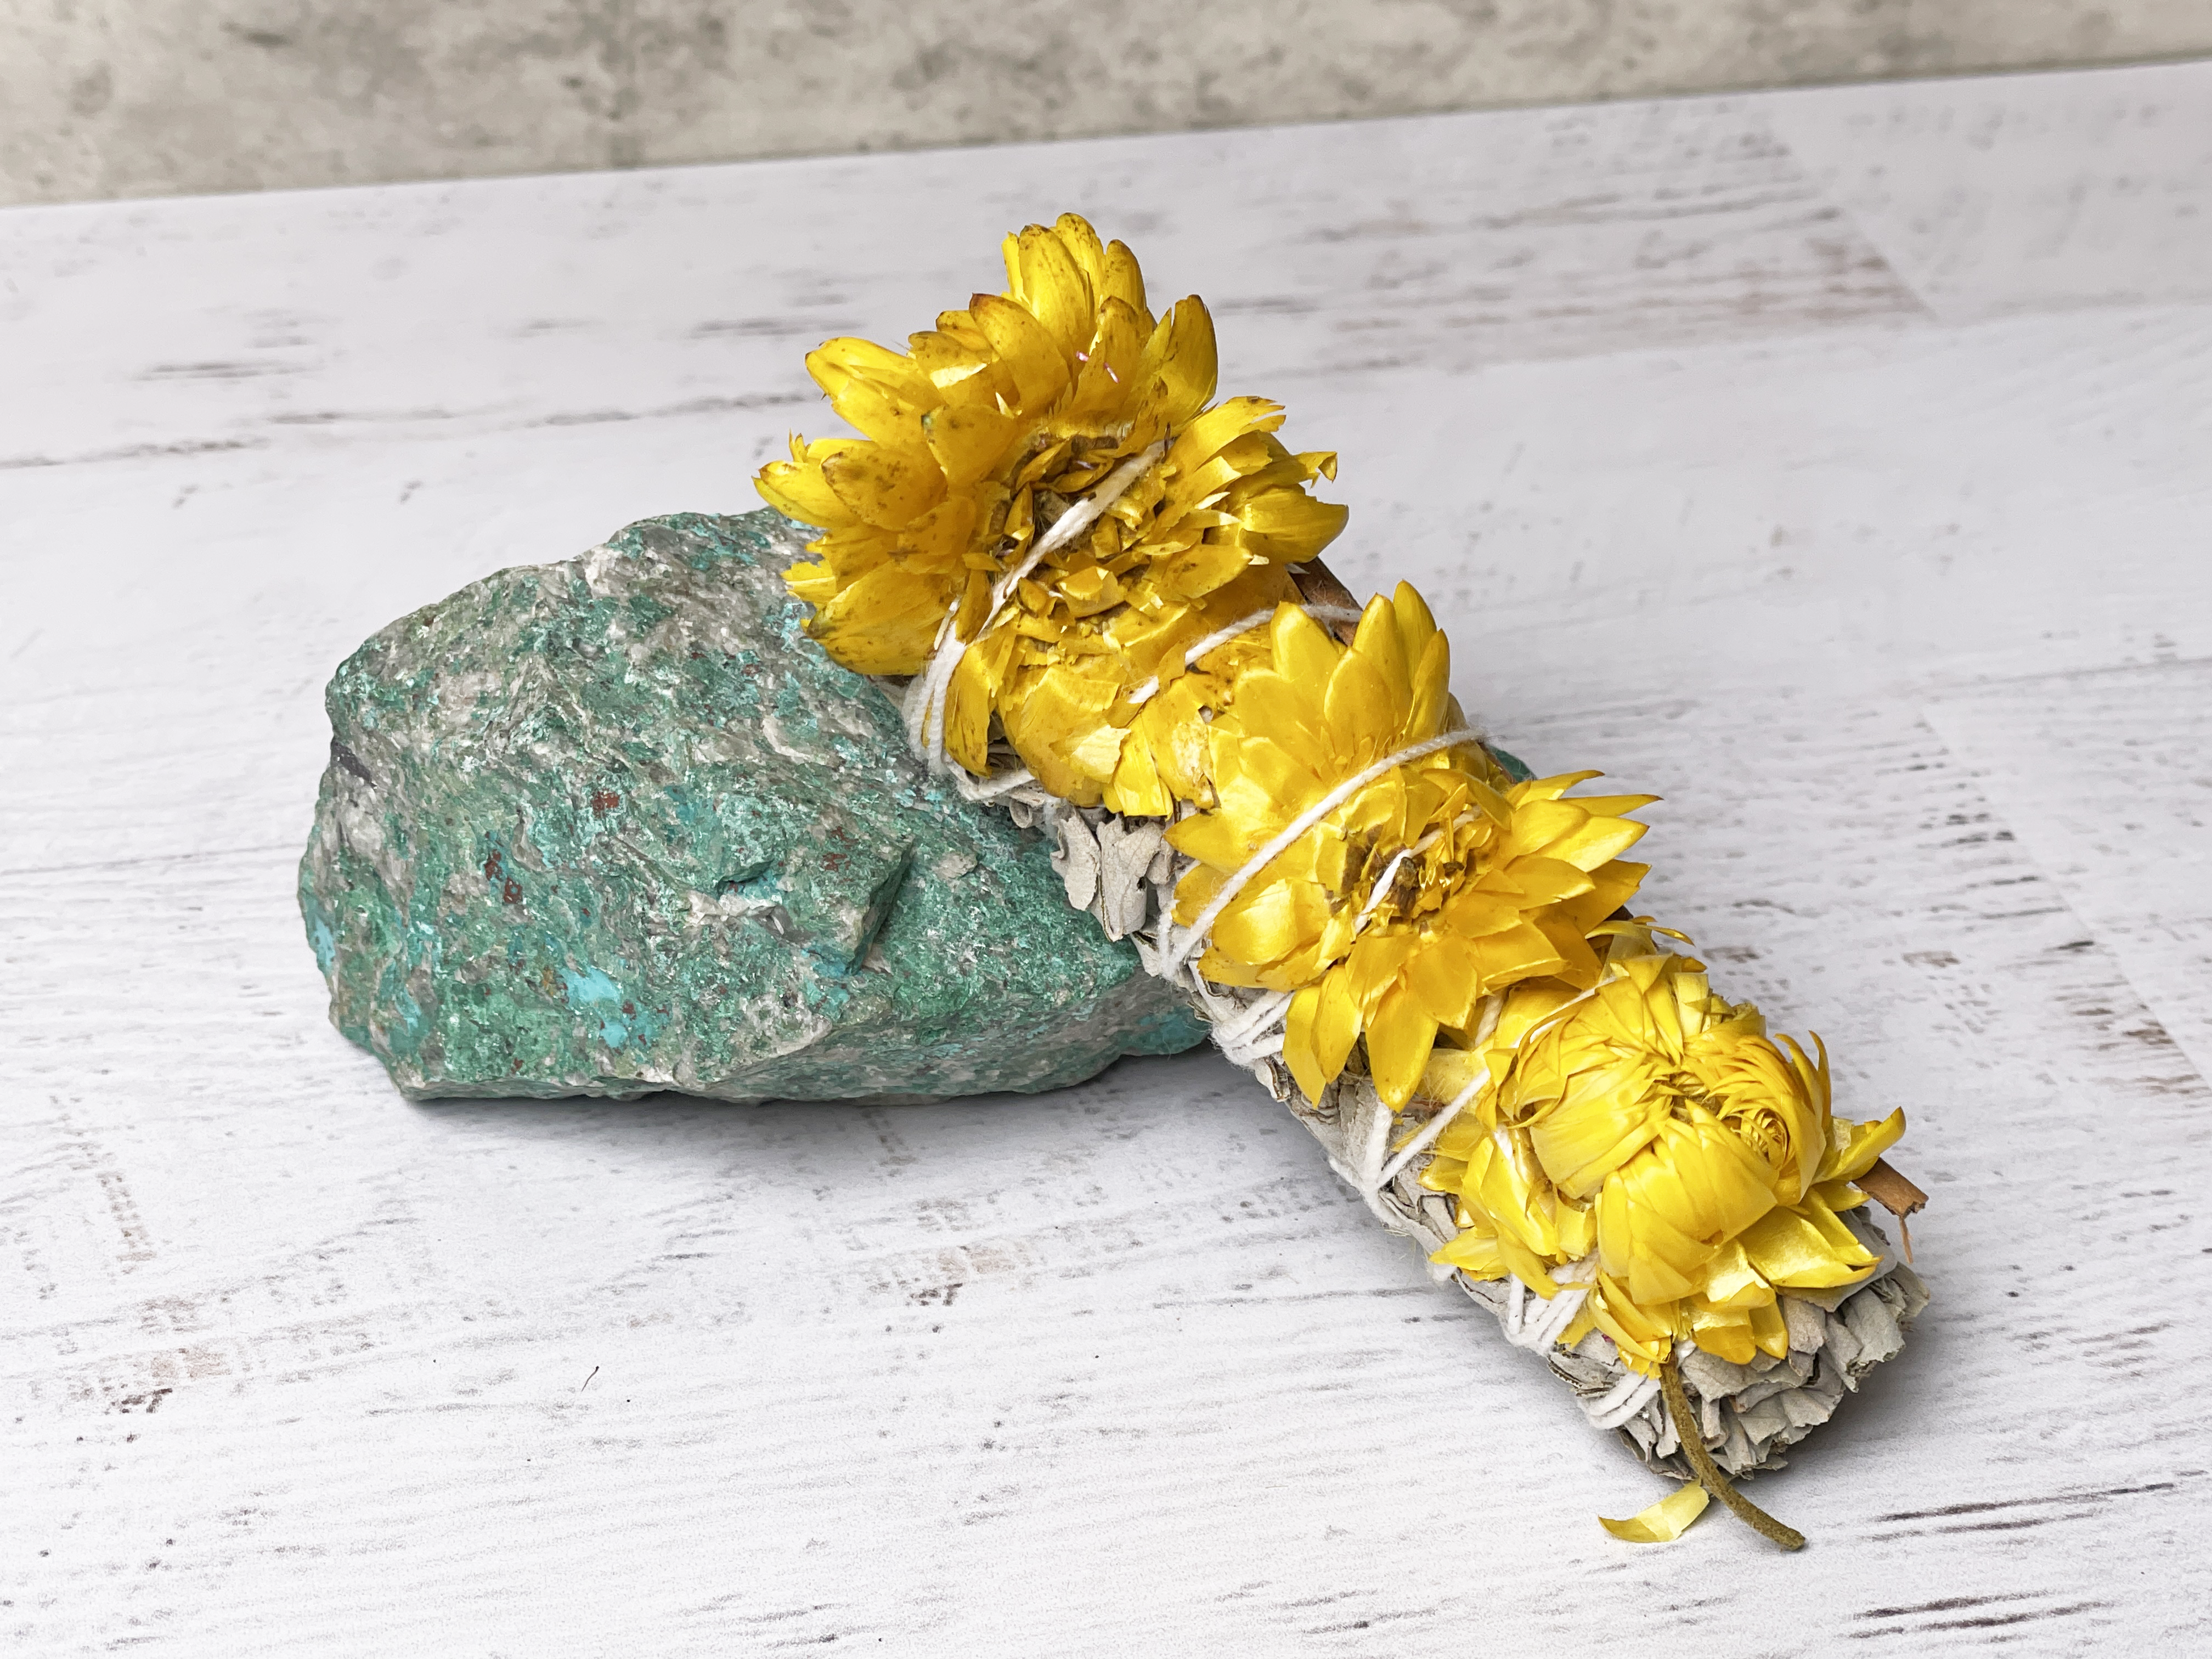 Buy Online Latest and Unique Sunflower White Sage Smudge Wand | Shop Best Spiritual Items - The Mystical Ritual